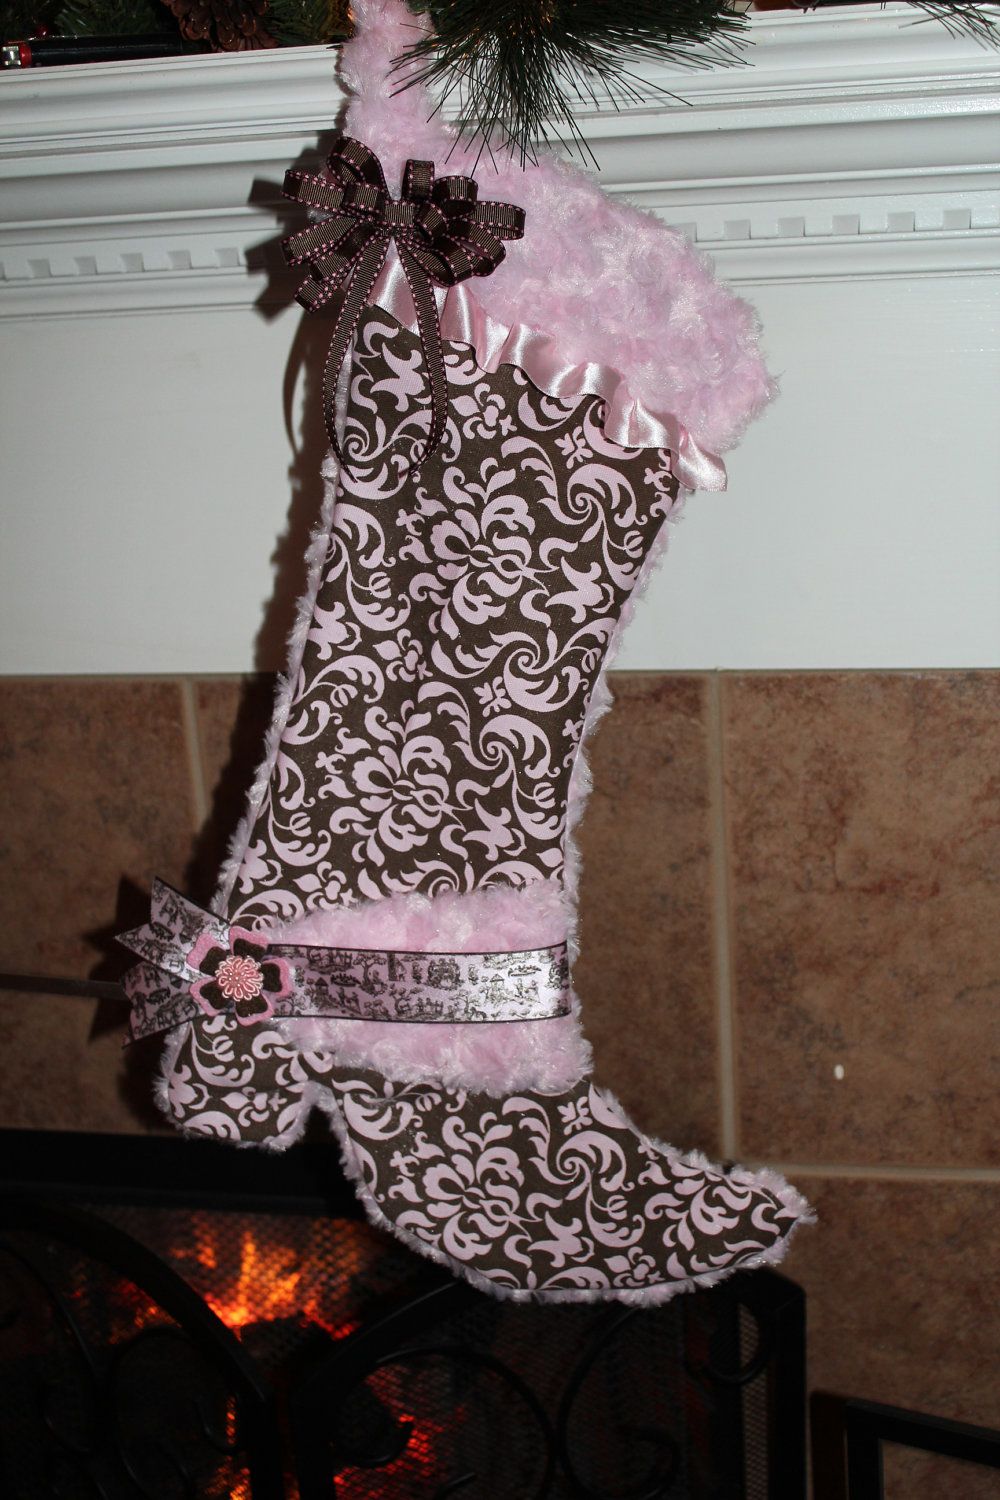 instructions cowboy boot christmas stocking